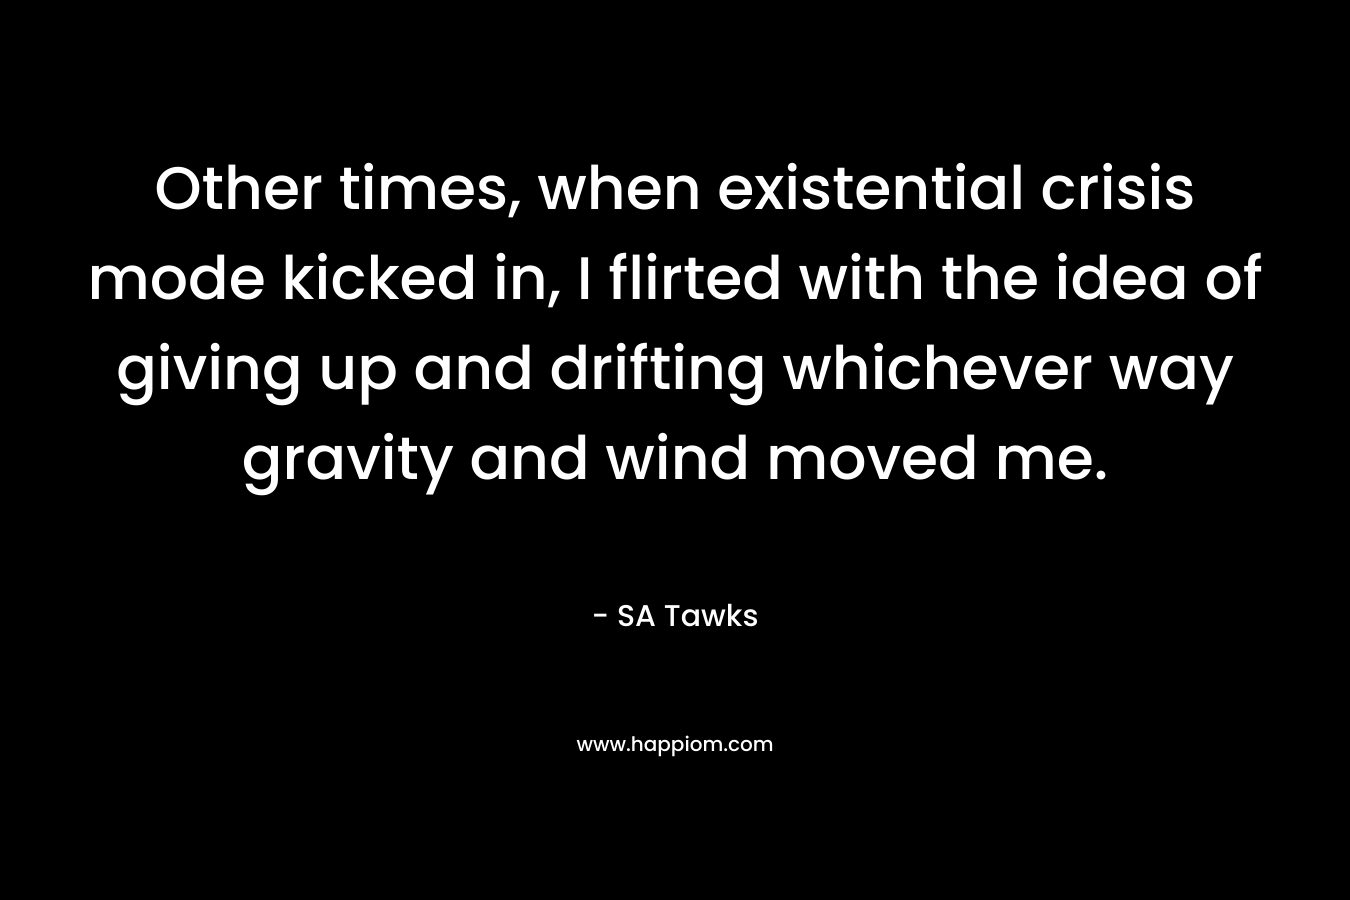 Other times, when existential crisis mode kicked in, I flirted with the idea of giving up and drifting whichever way gravity and wind moved me. – SA Tawks